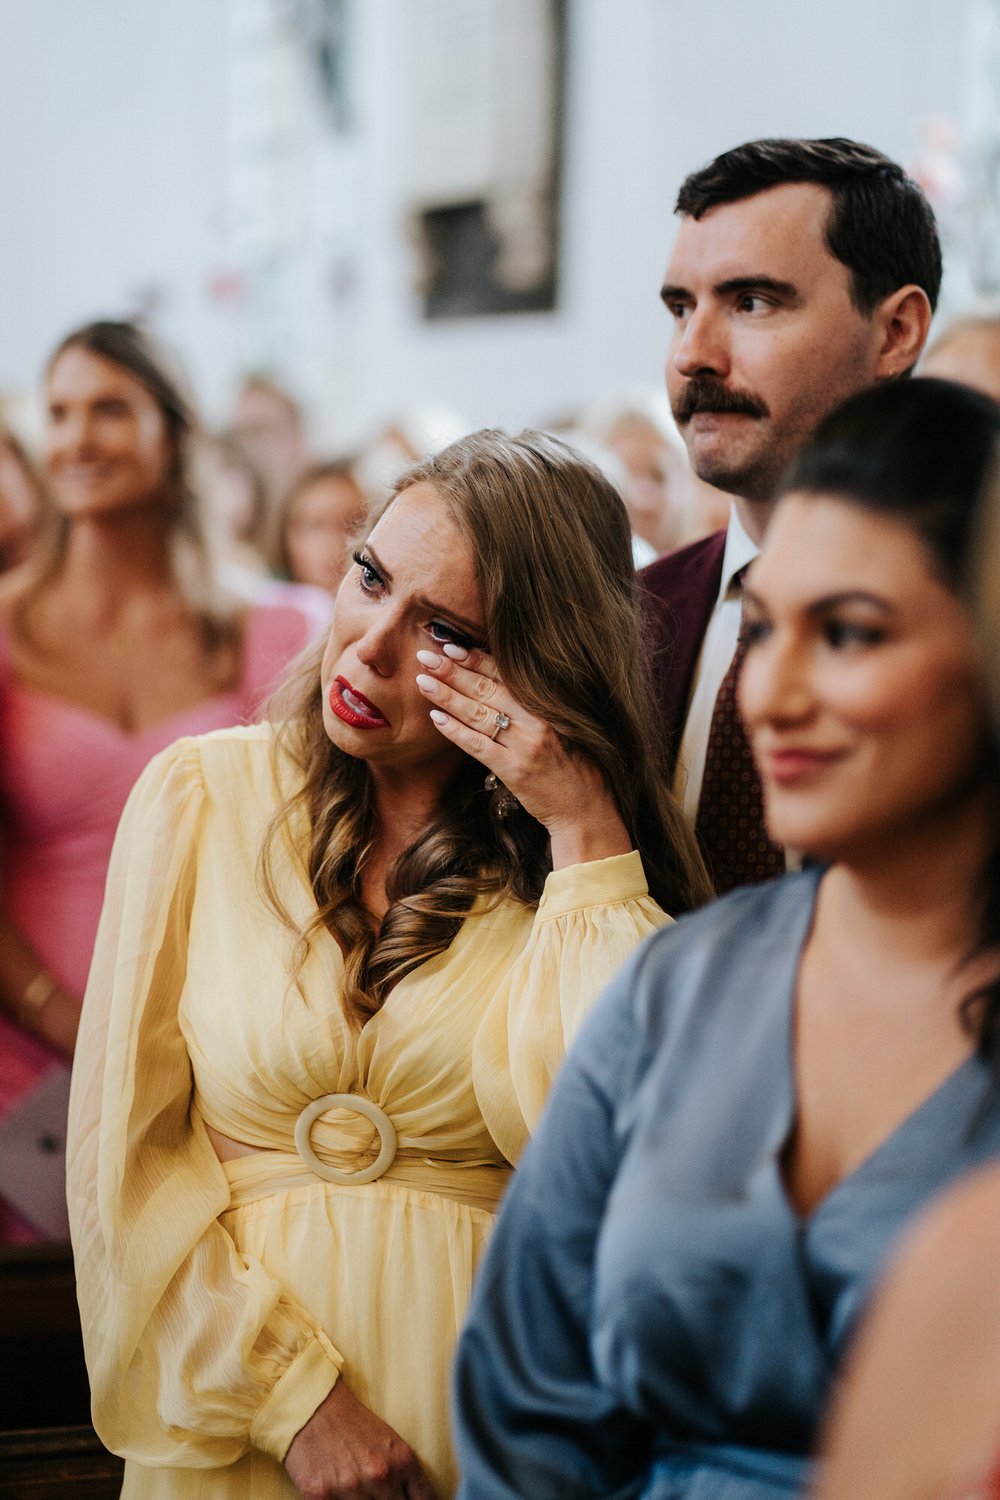 Guests wipes tear off her cheek as she sees the bride walking down the aisle